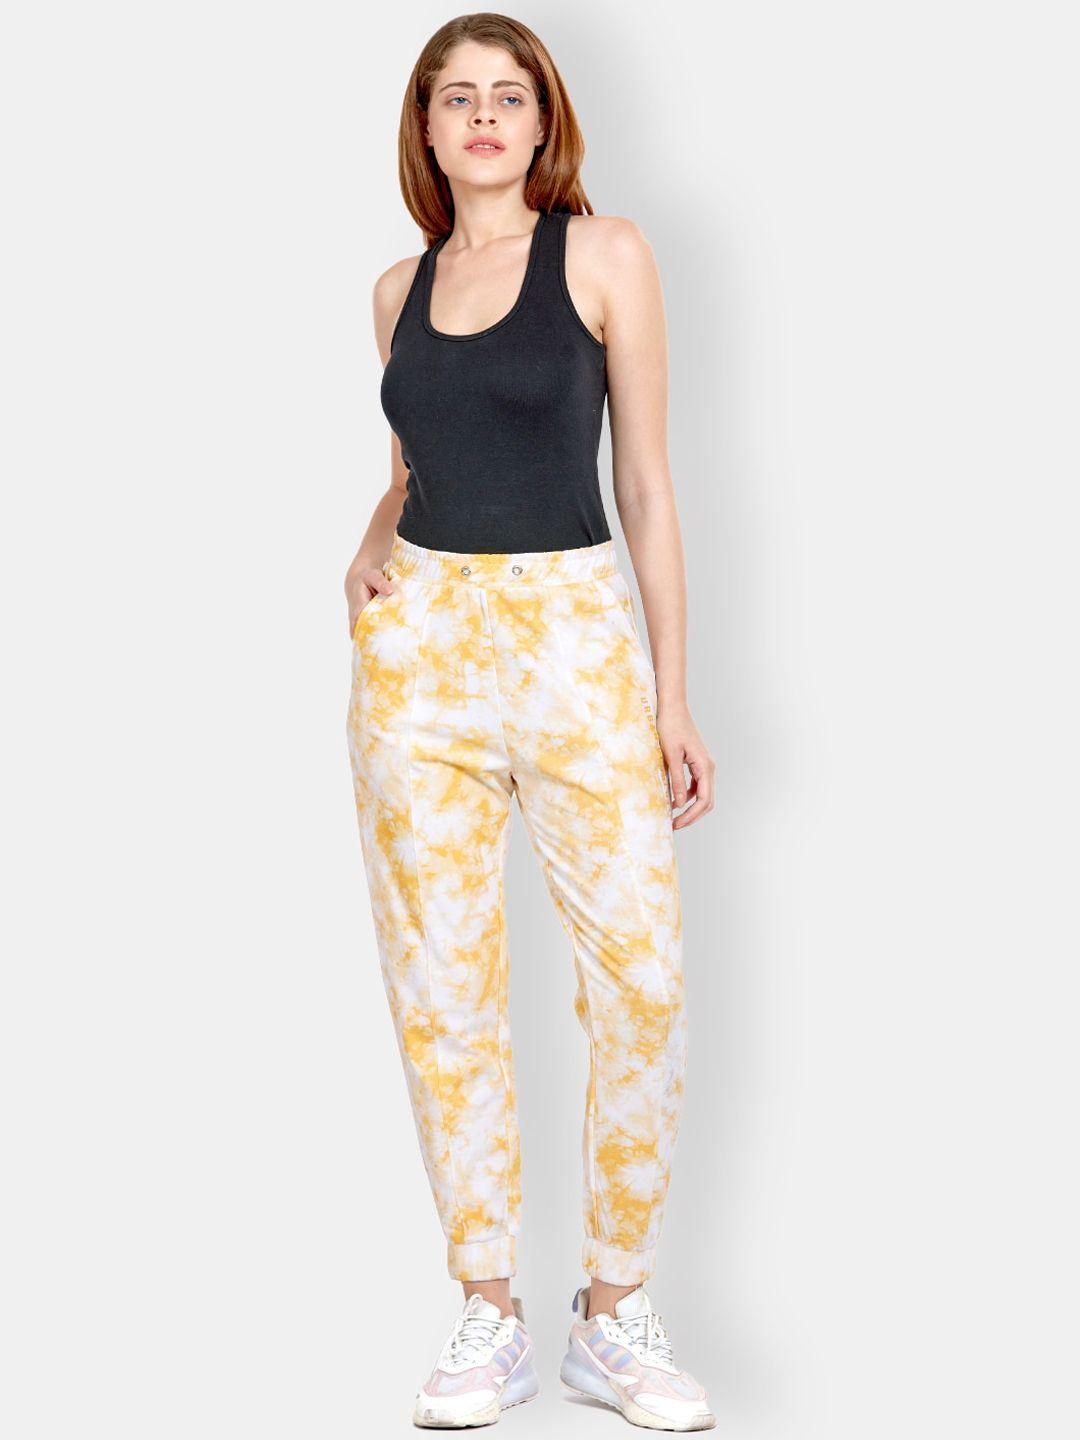 maysixty women abstract printed mid-rise cotton joggers